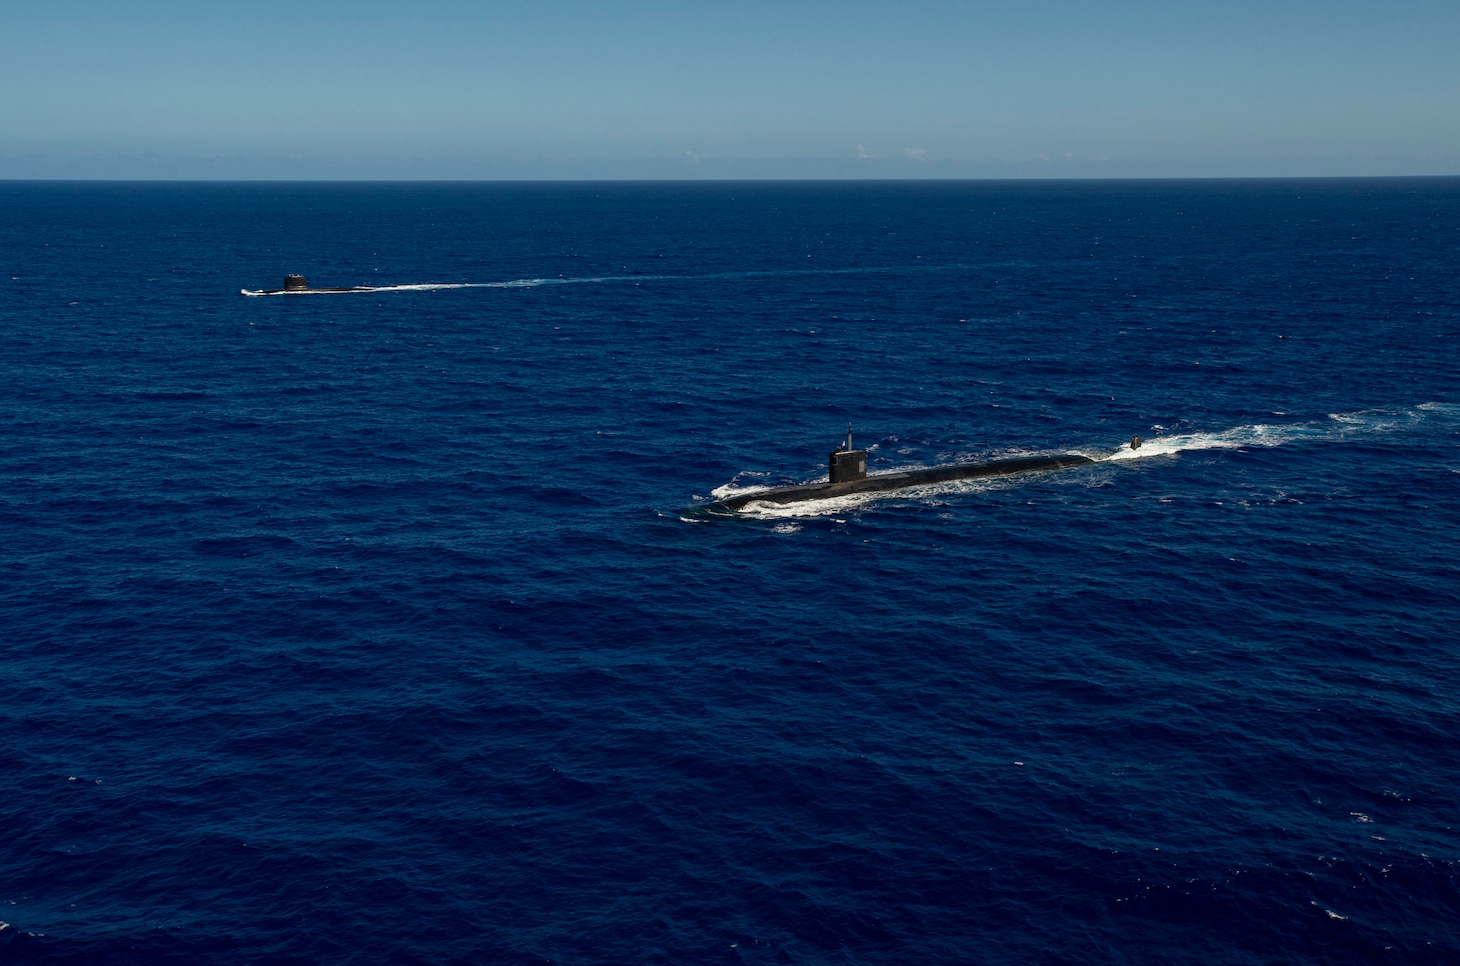 WATERS OFF GUAM (Dec. 11, 2020) The Los Angeles-class fast-attack submarine USS Asheville (SSN 758), right, and the French Navy Rubis-class nuclear powered submarine (SSN) Émeraude steam in formation off the coast of Guam during a photo exercise. Asheville and Émeraude practiced high-end maritime skills in a multitude of disciplines designed to enhance interoperability between maritime forces. Asheville is one of four forward-deployed submarines assigned to Commander, Submarine Squadron 15. (U.S. Navy photo by Mass Communication Specialist 2nd Class Kelsey J. Hockenberger)